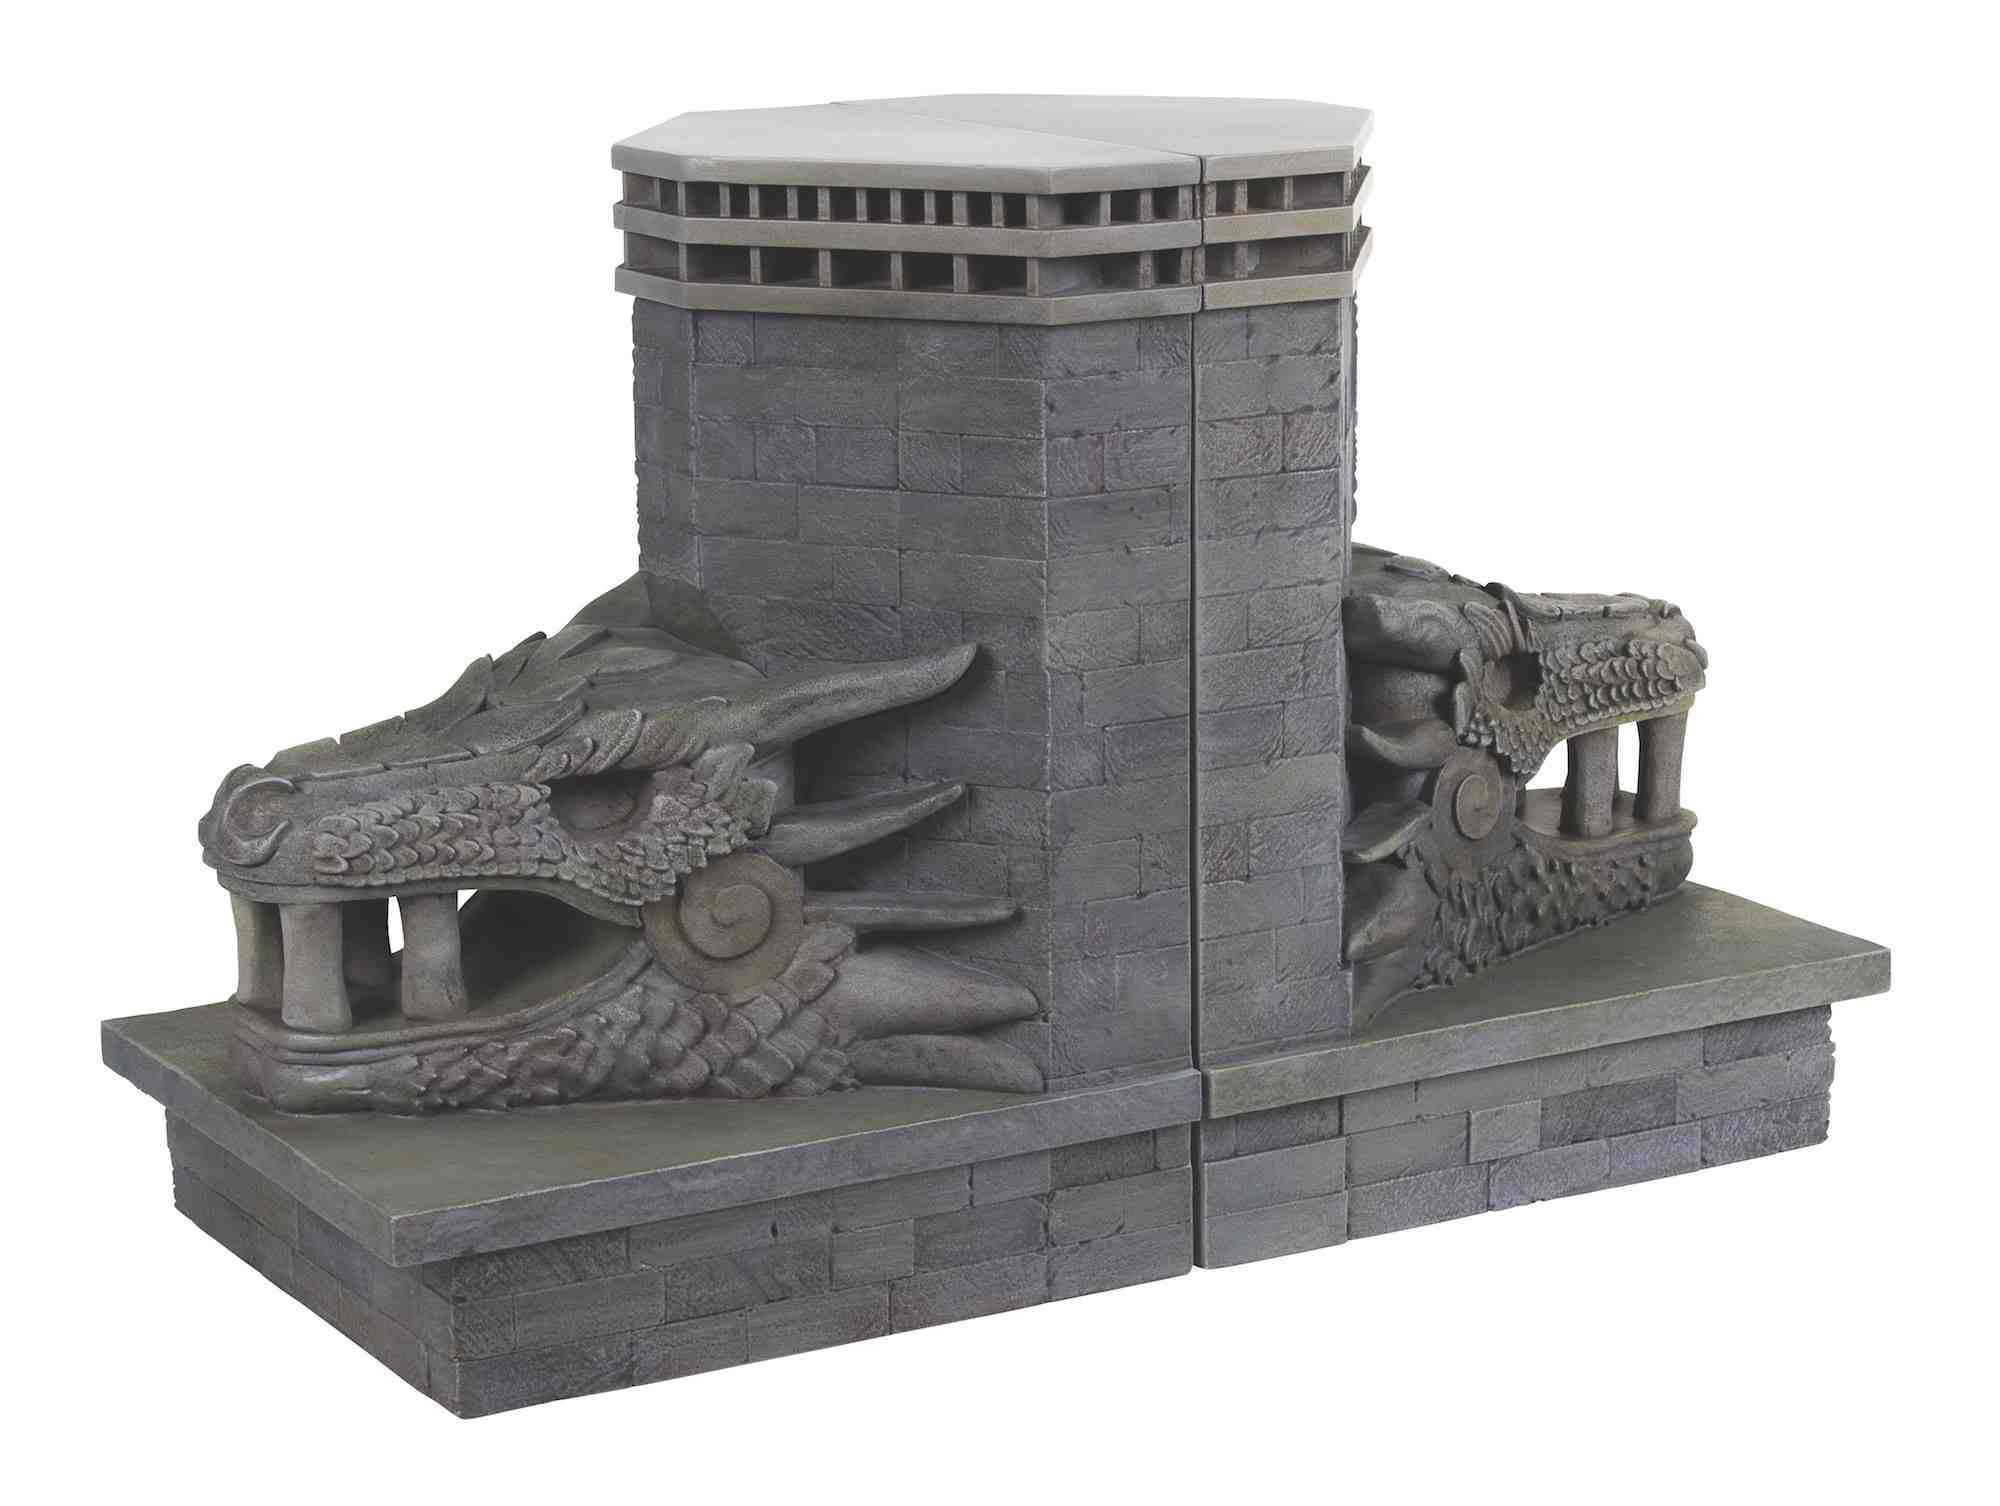 Check out new Game of Thrones products from Dark Horse showcased at the NY Toy Fair